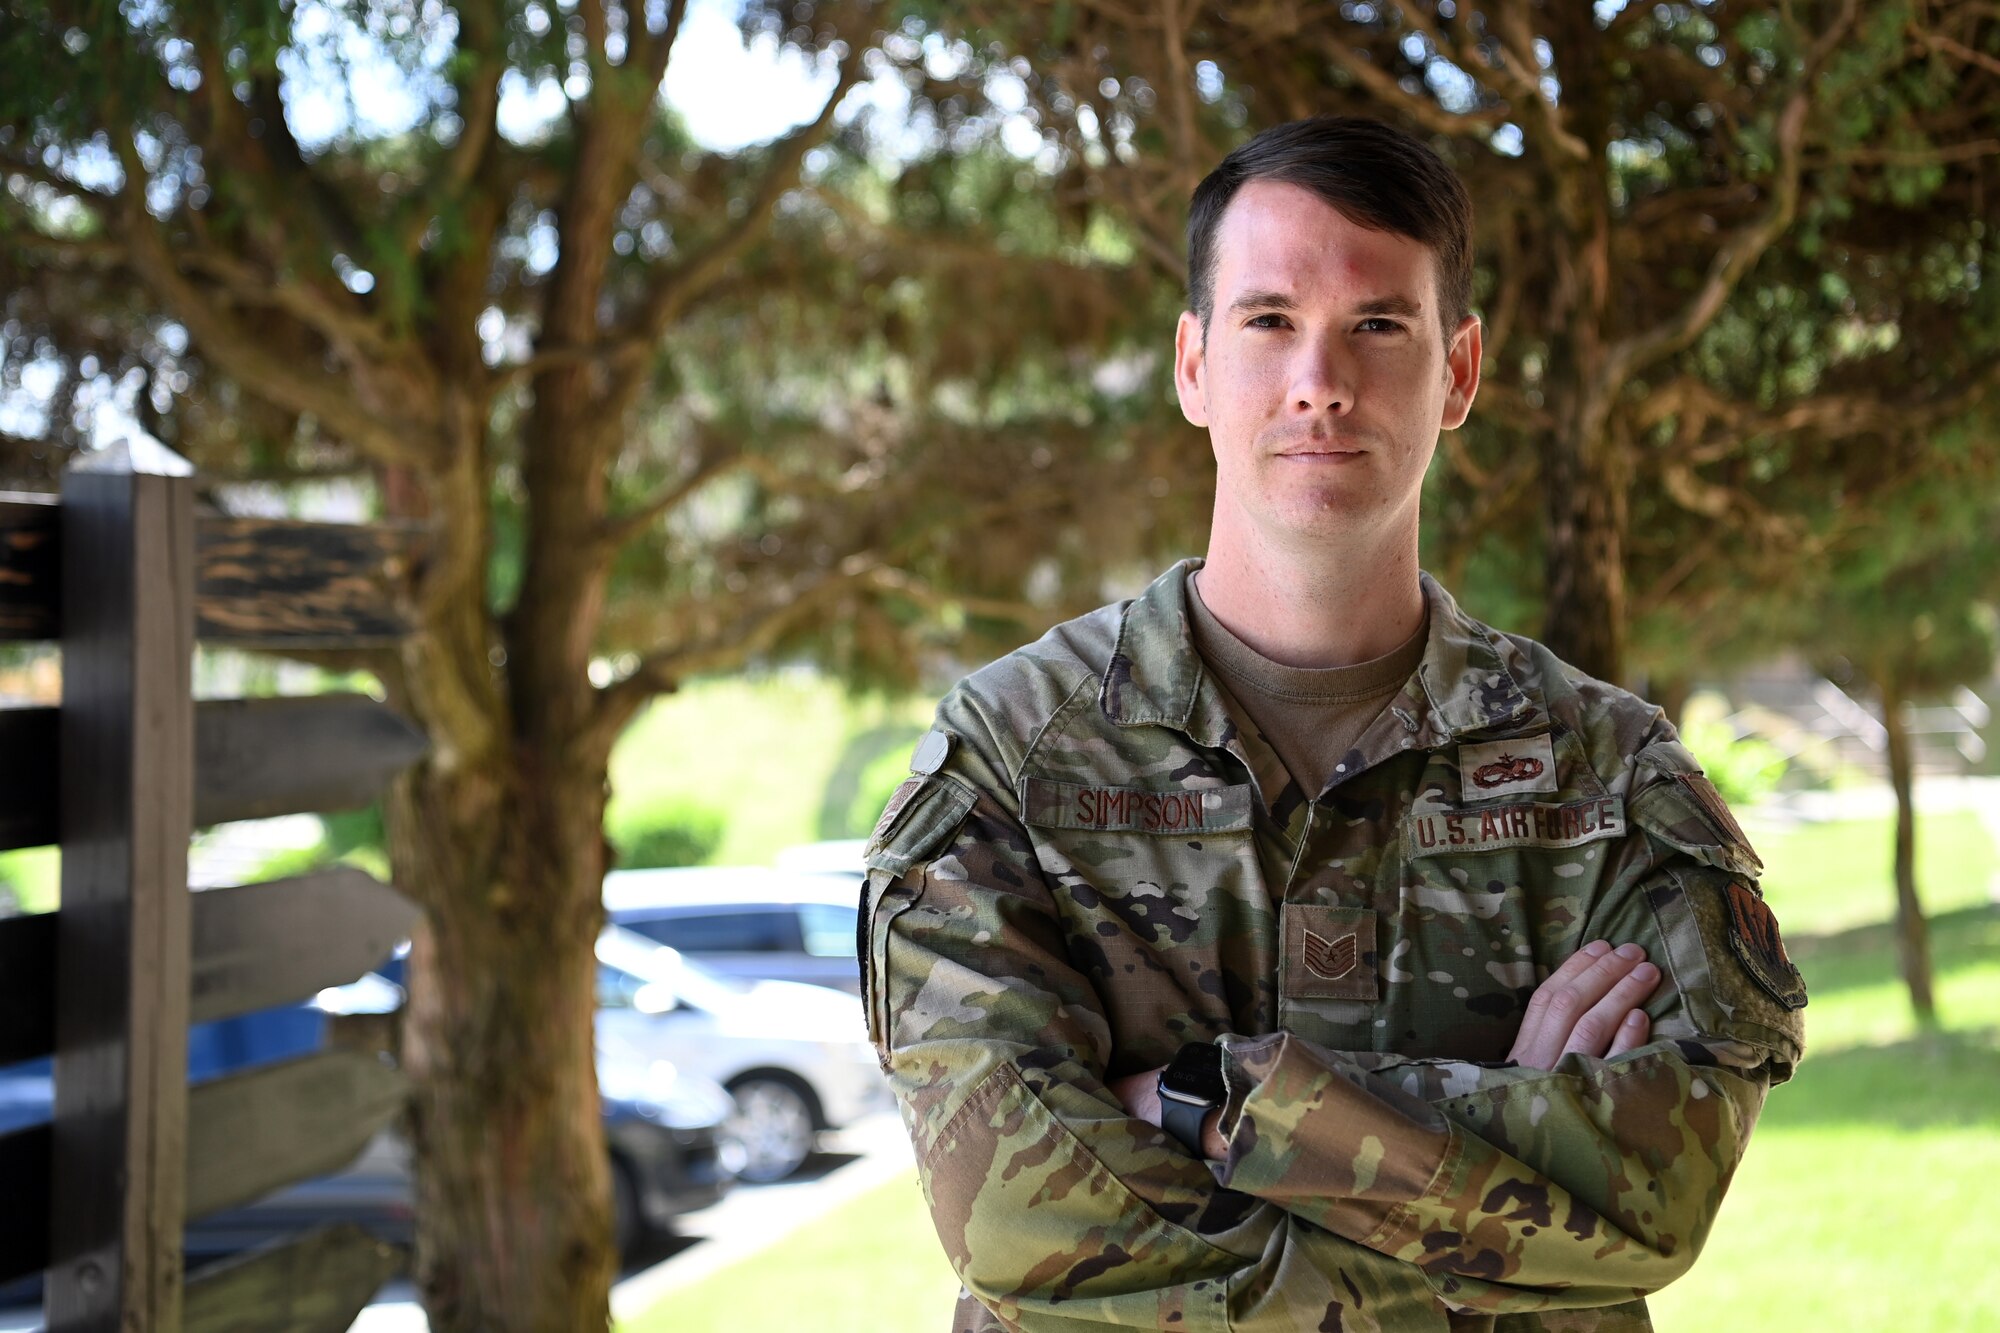 Tech. Sgt. Justin Simpson, 303rd Intelligence Squadron talent manager, poses for a photo outside the Seventh Air Force headquarters on Osan Air Base, Republic of Korea, May 9, 2022. Simpson is the first to win the 694th Intelligence, Surveillance and Reconnaissance Group’s Diversity, Equity & Inclusion quarterly award. (U.S. Air Force photo by Master Sgt. Rachelle Morris)